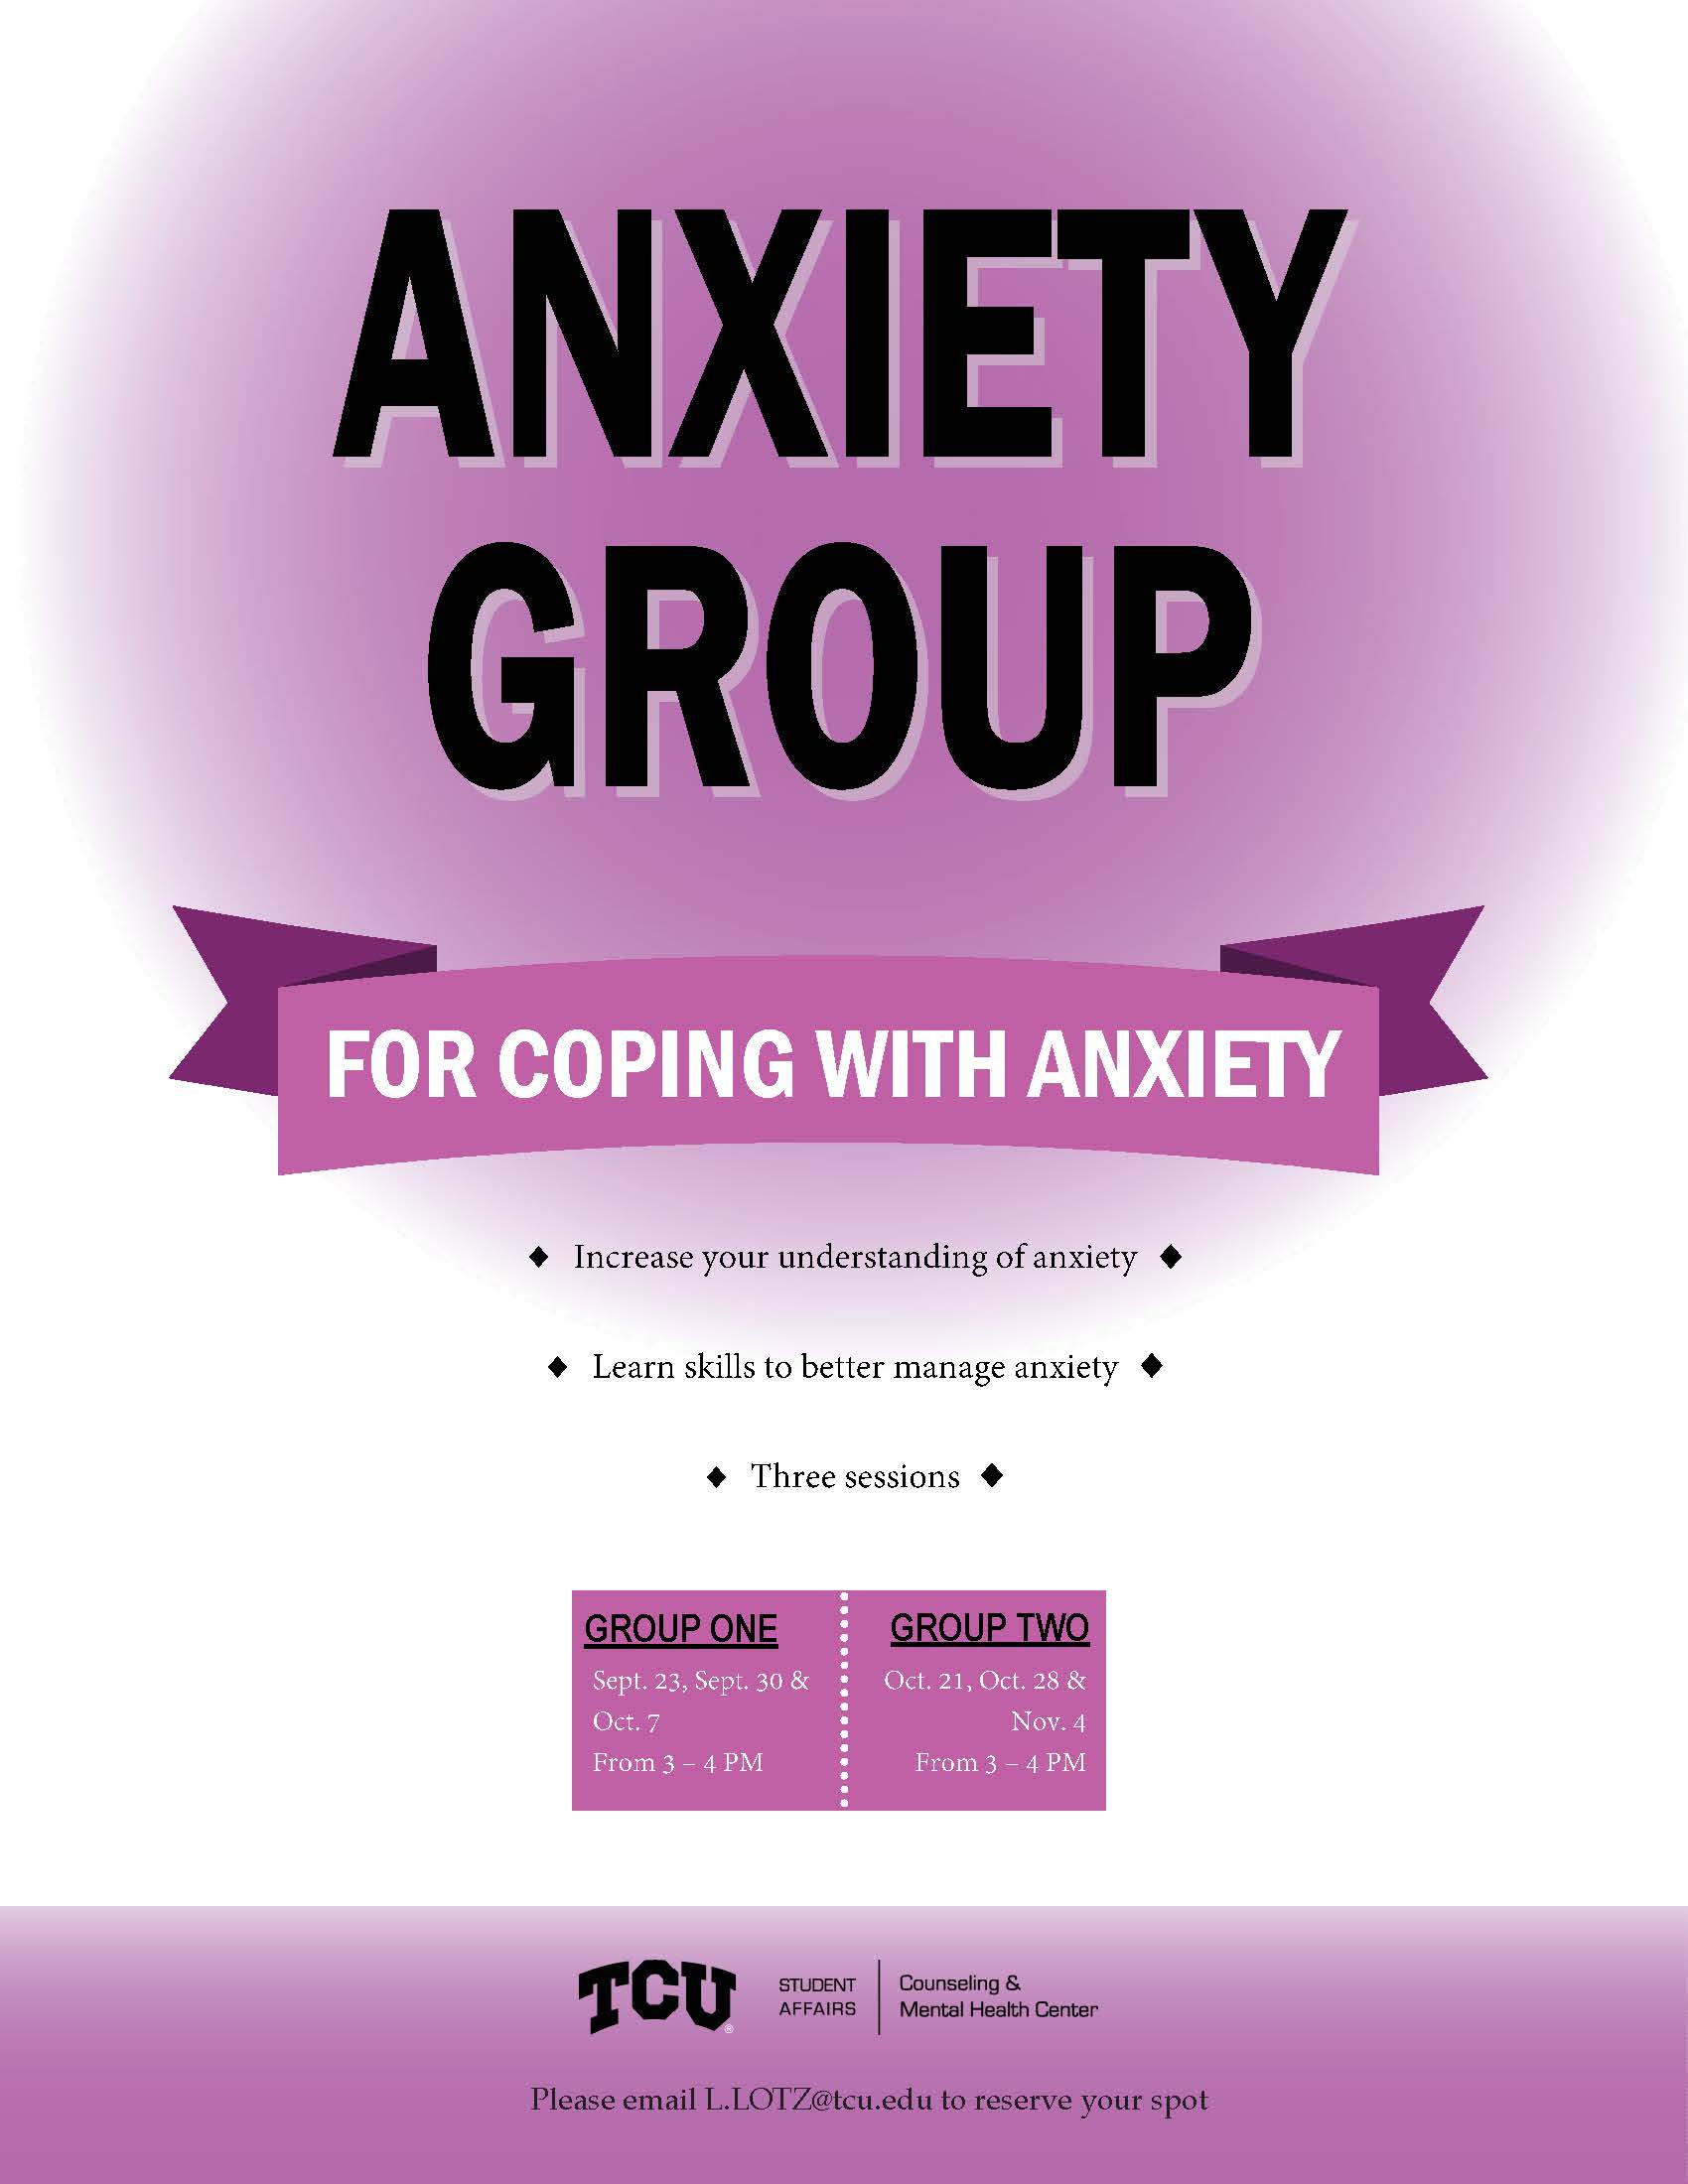 Anxiety Group Flyer PDF